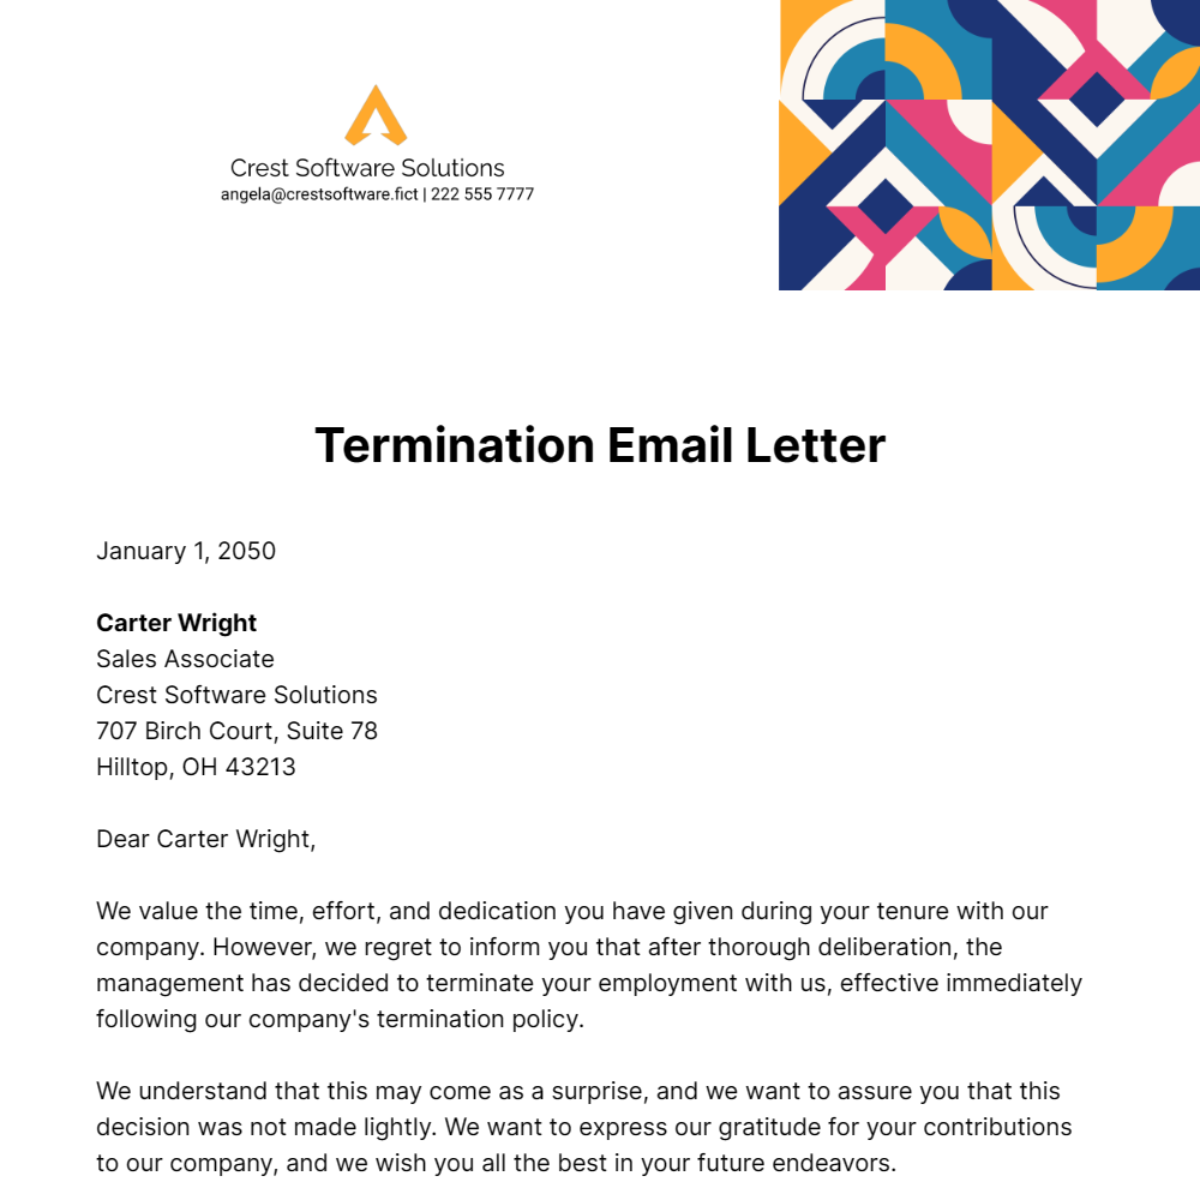 Termination Email Letter Template